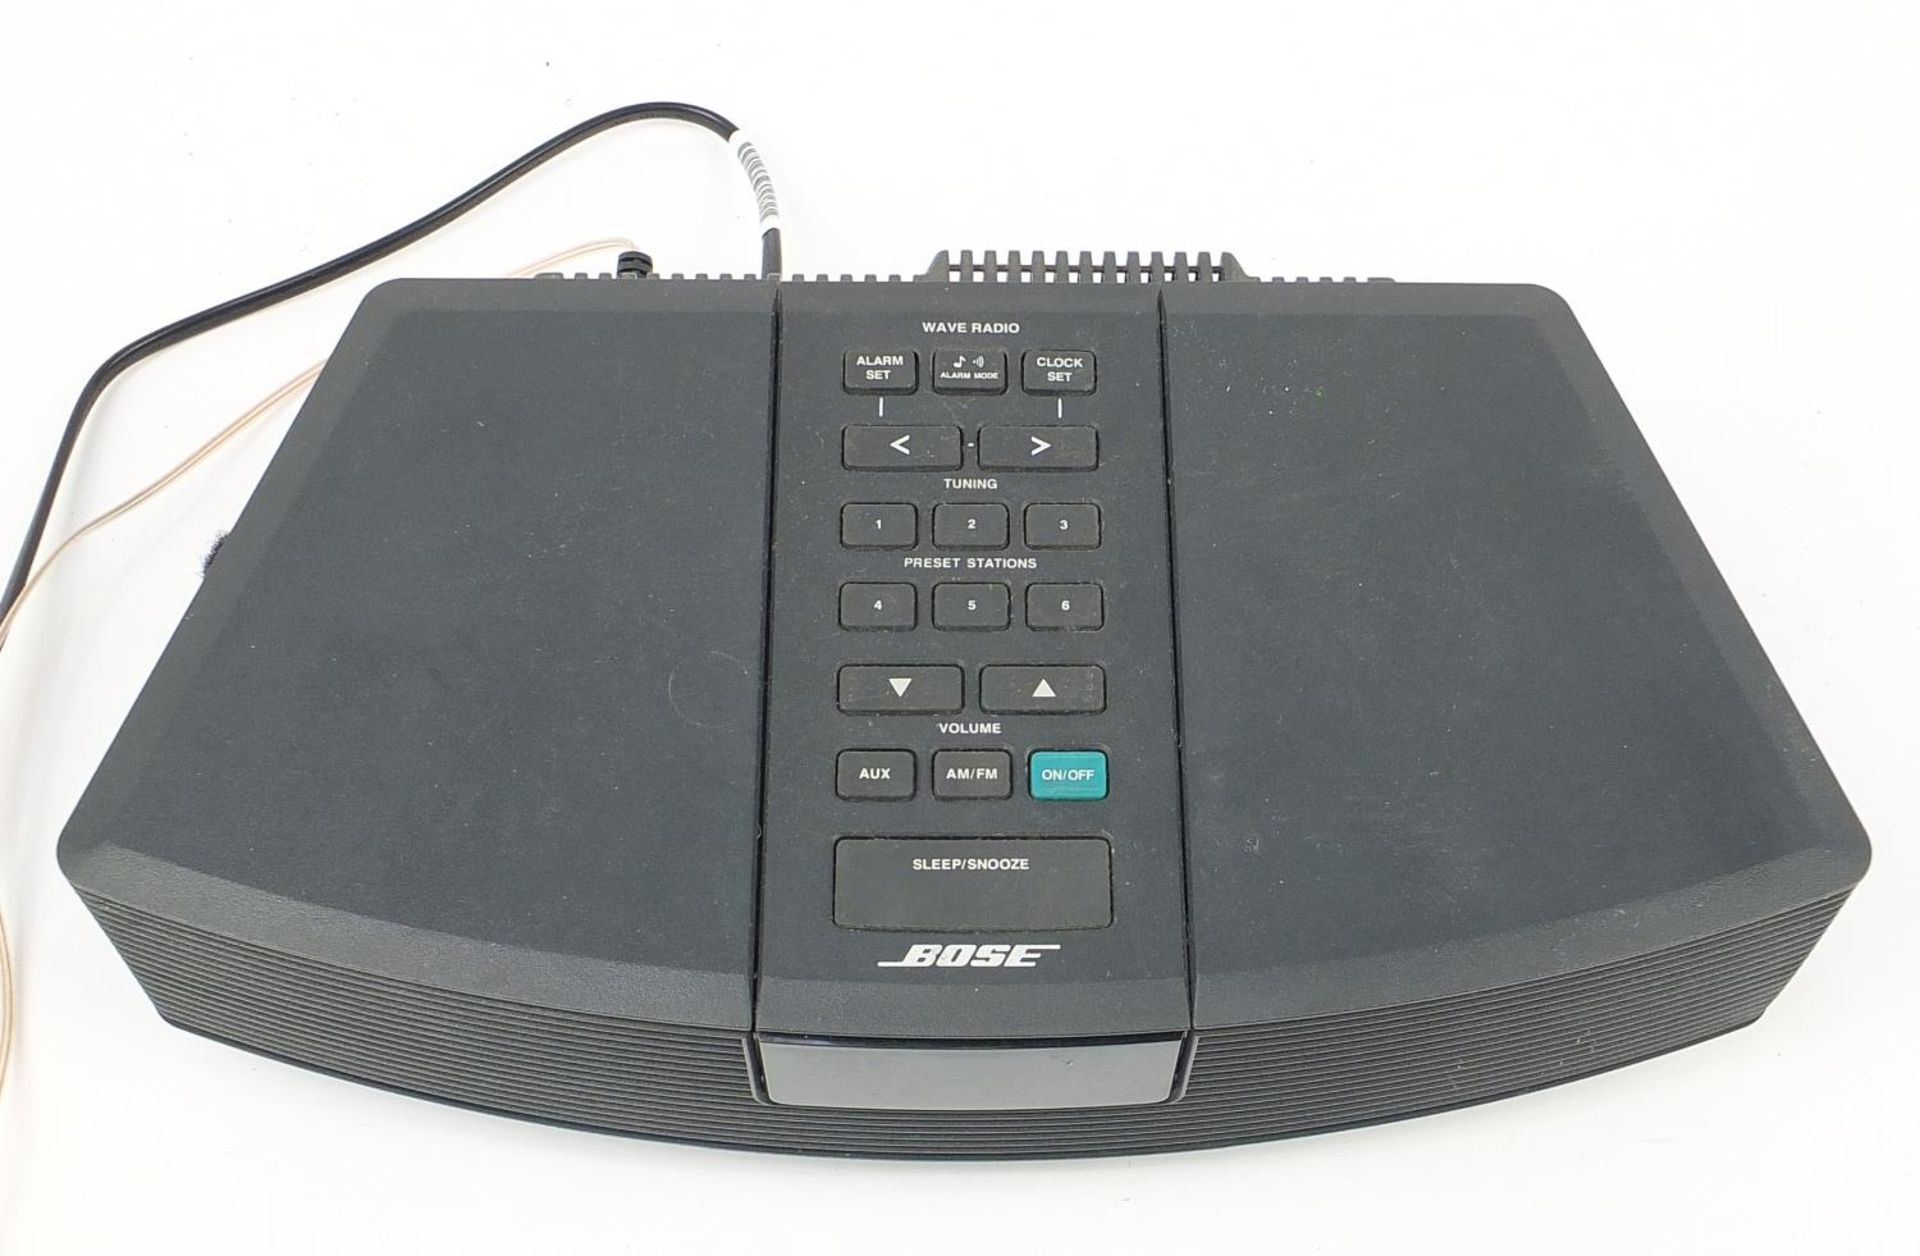 Bose Wave radio model AWR1-2W, sold as seen - Image 2 of 3